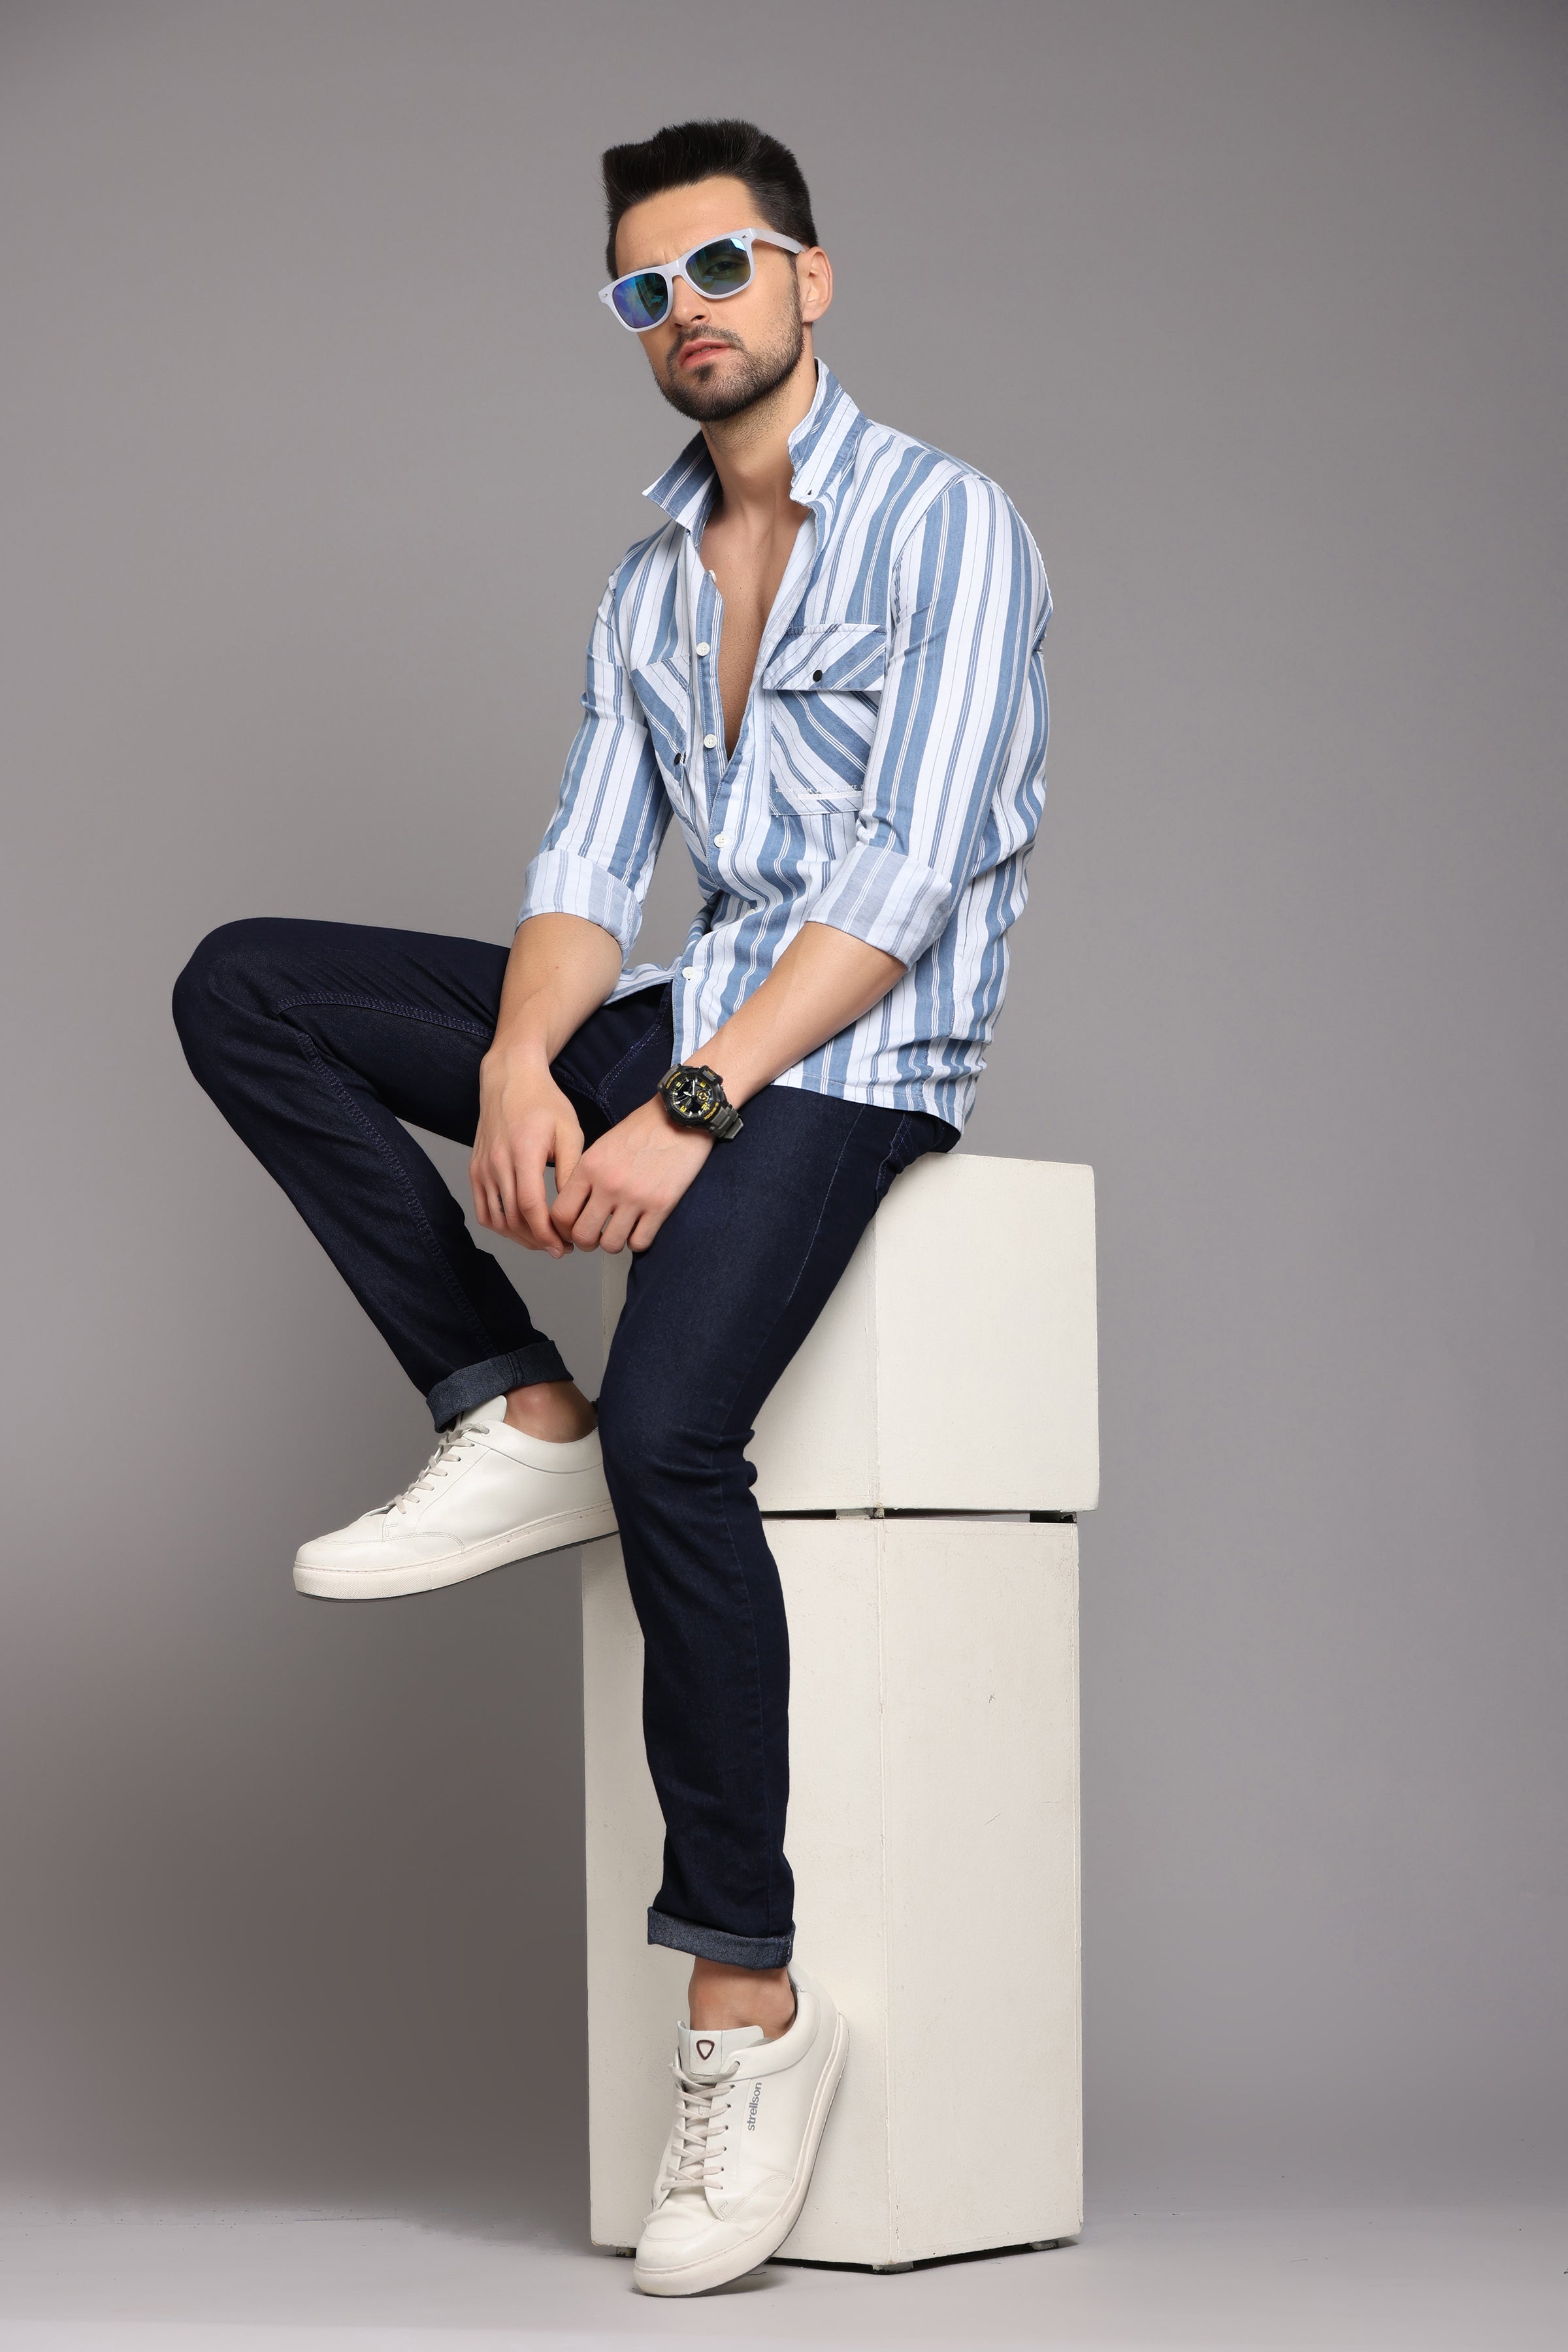 Blue and White Striped Full Sleeve Shirt Shirts Project 30 